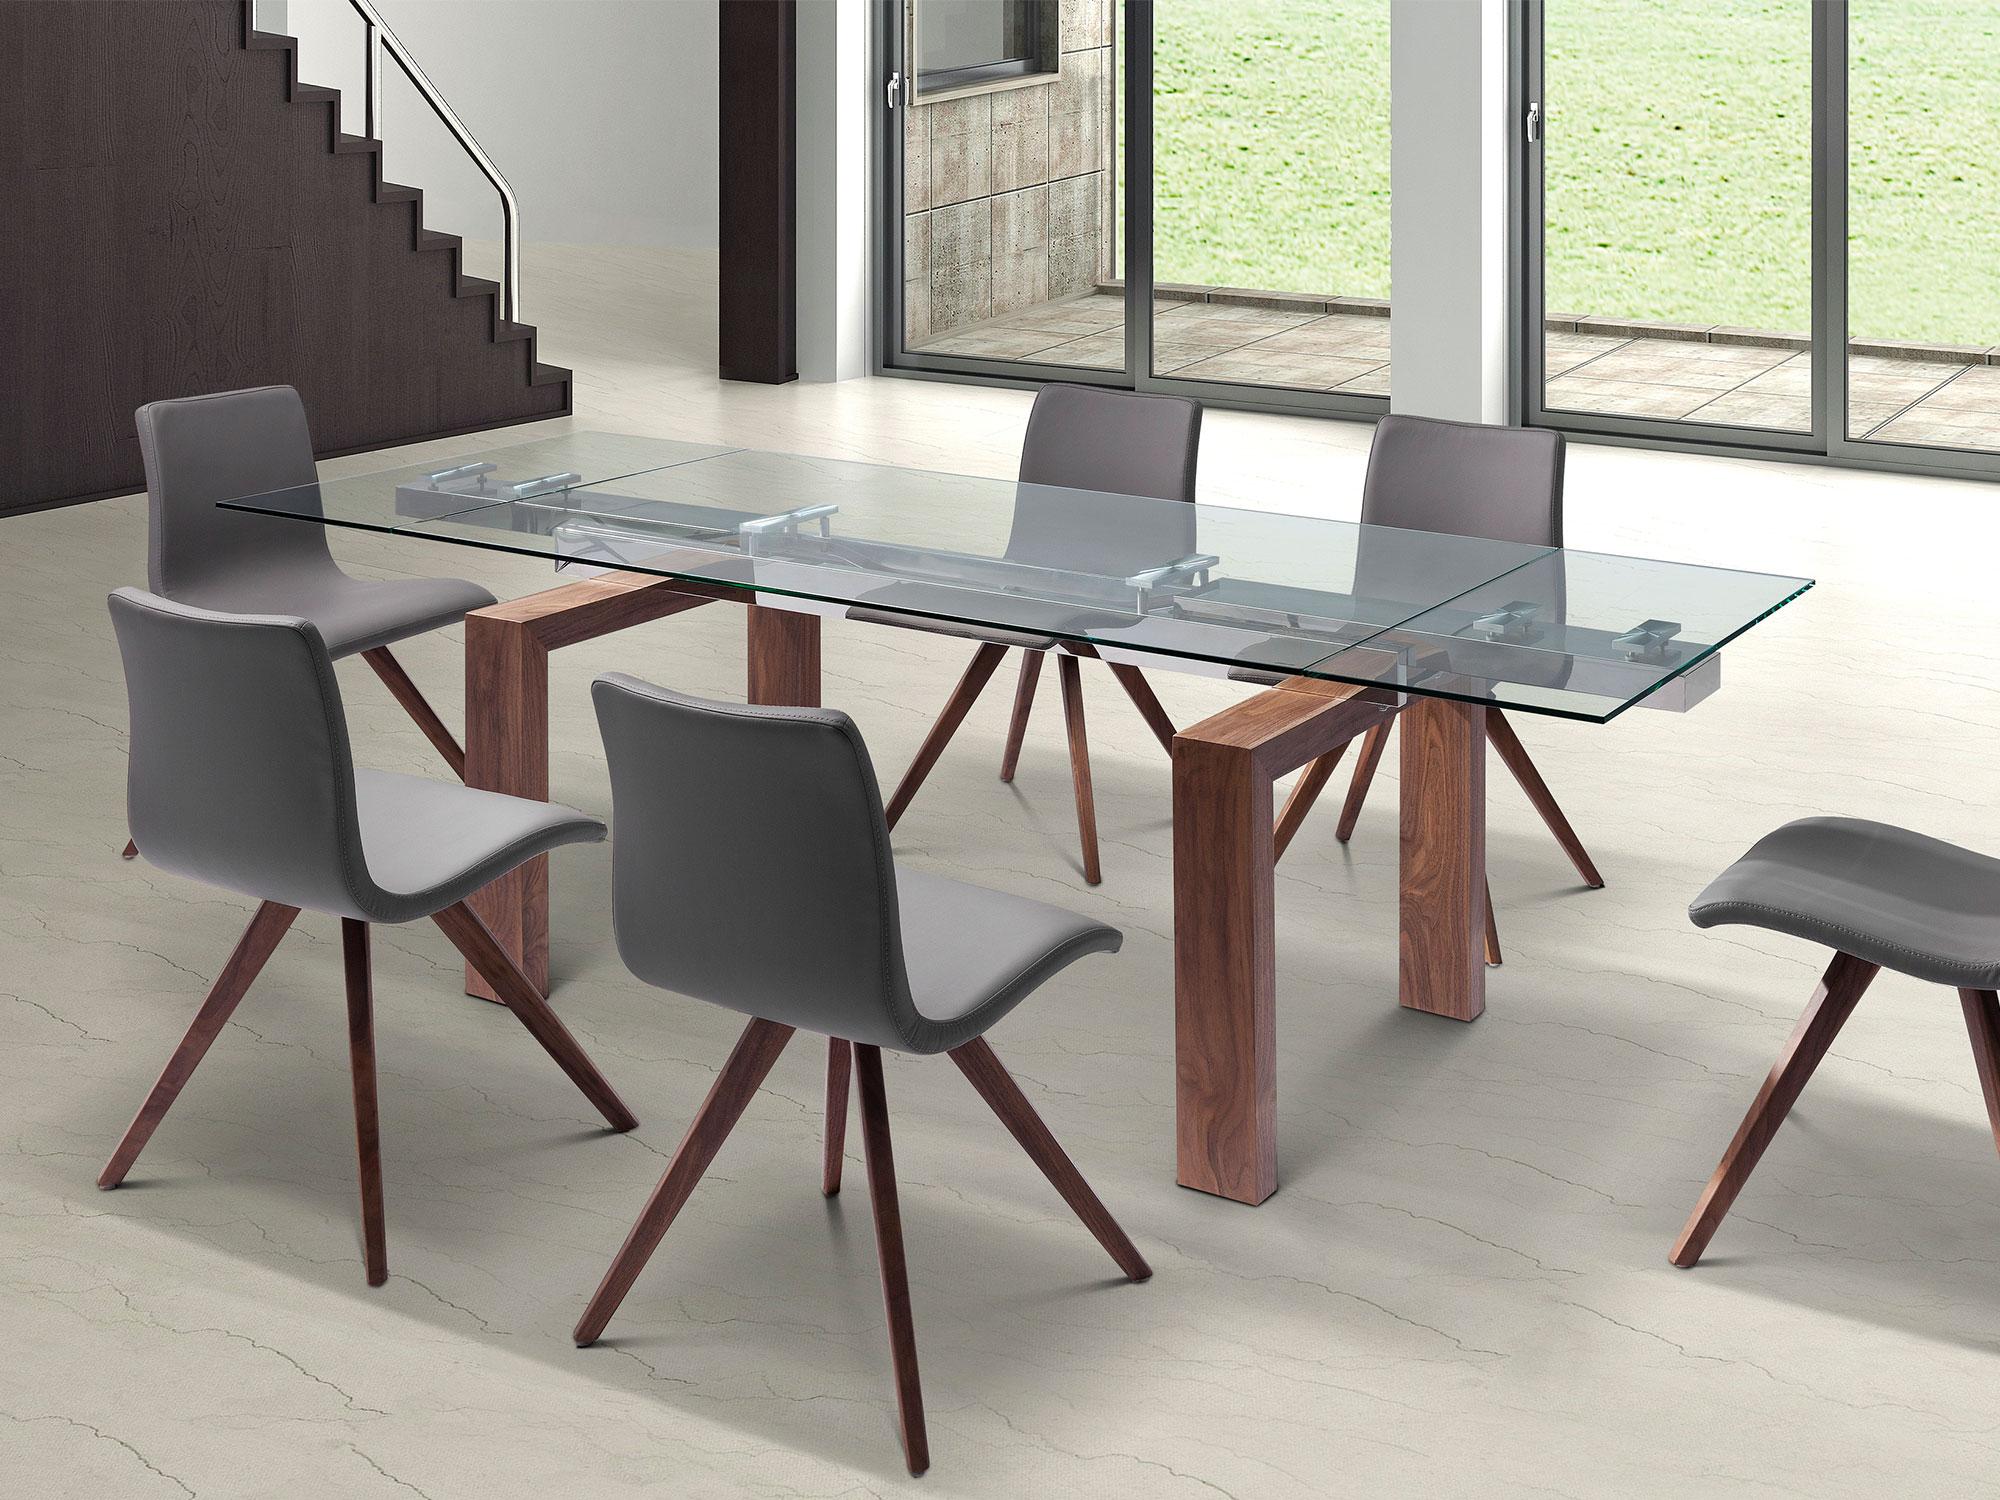 Modern Dining Room Set DT1256-WLT-7PC Davy DT1256-WLT-7PC in Walnut 